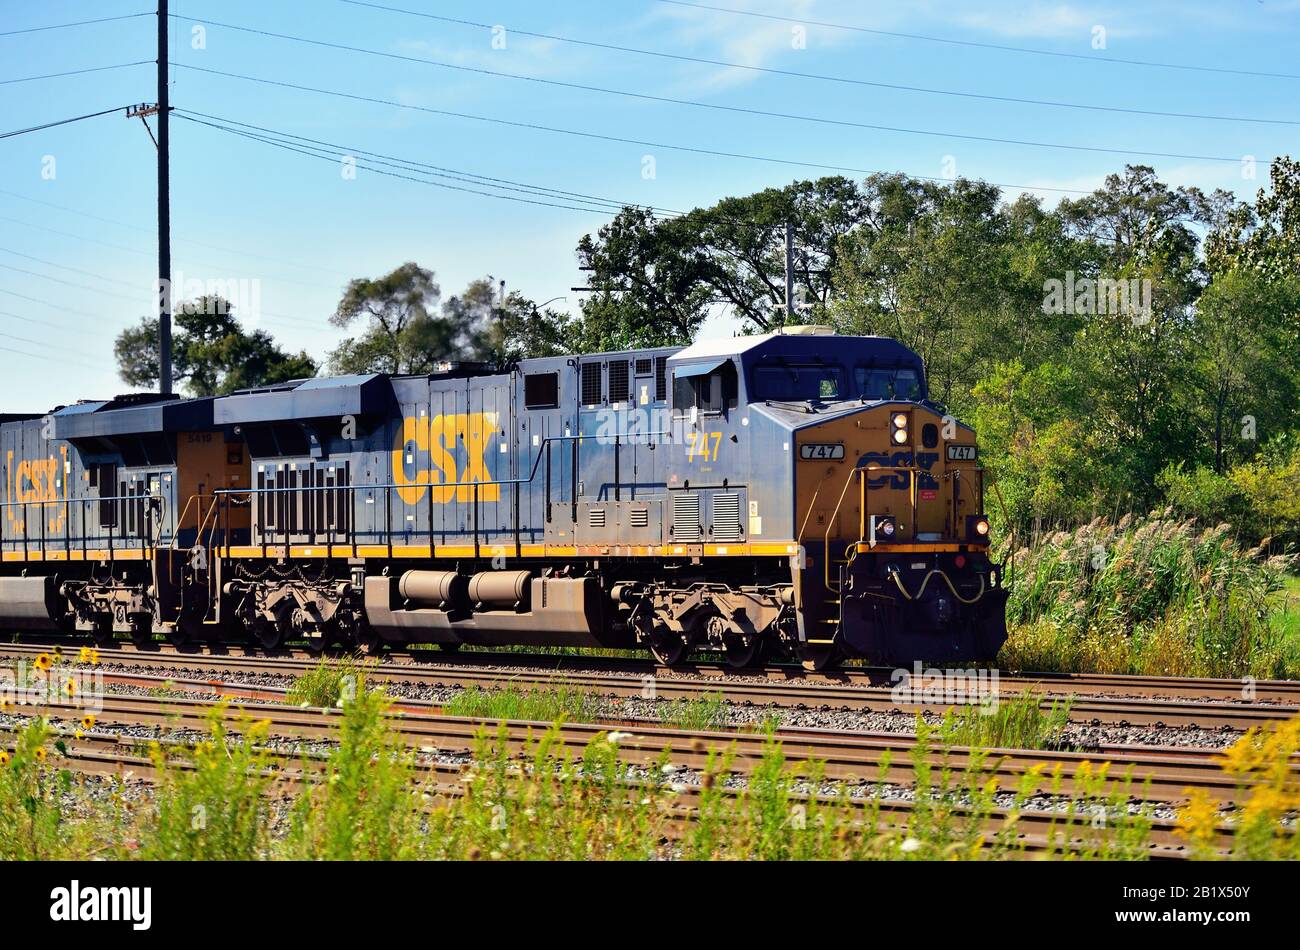 Dolton, Illinois, USA. Locomotives lead a CSX (CSX Transportation) freight train moving on a busy multi-track route through the Chicago suburb. Stock Photo